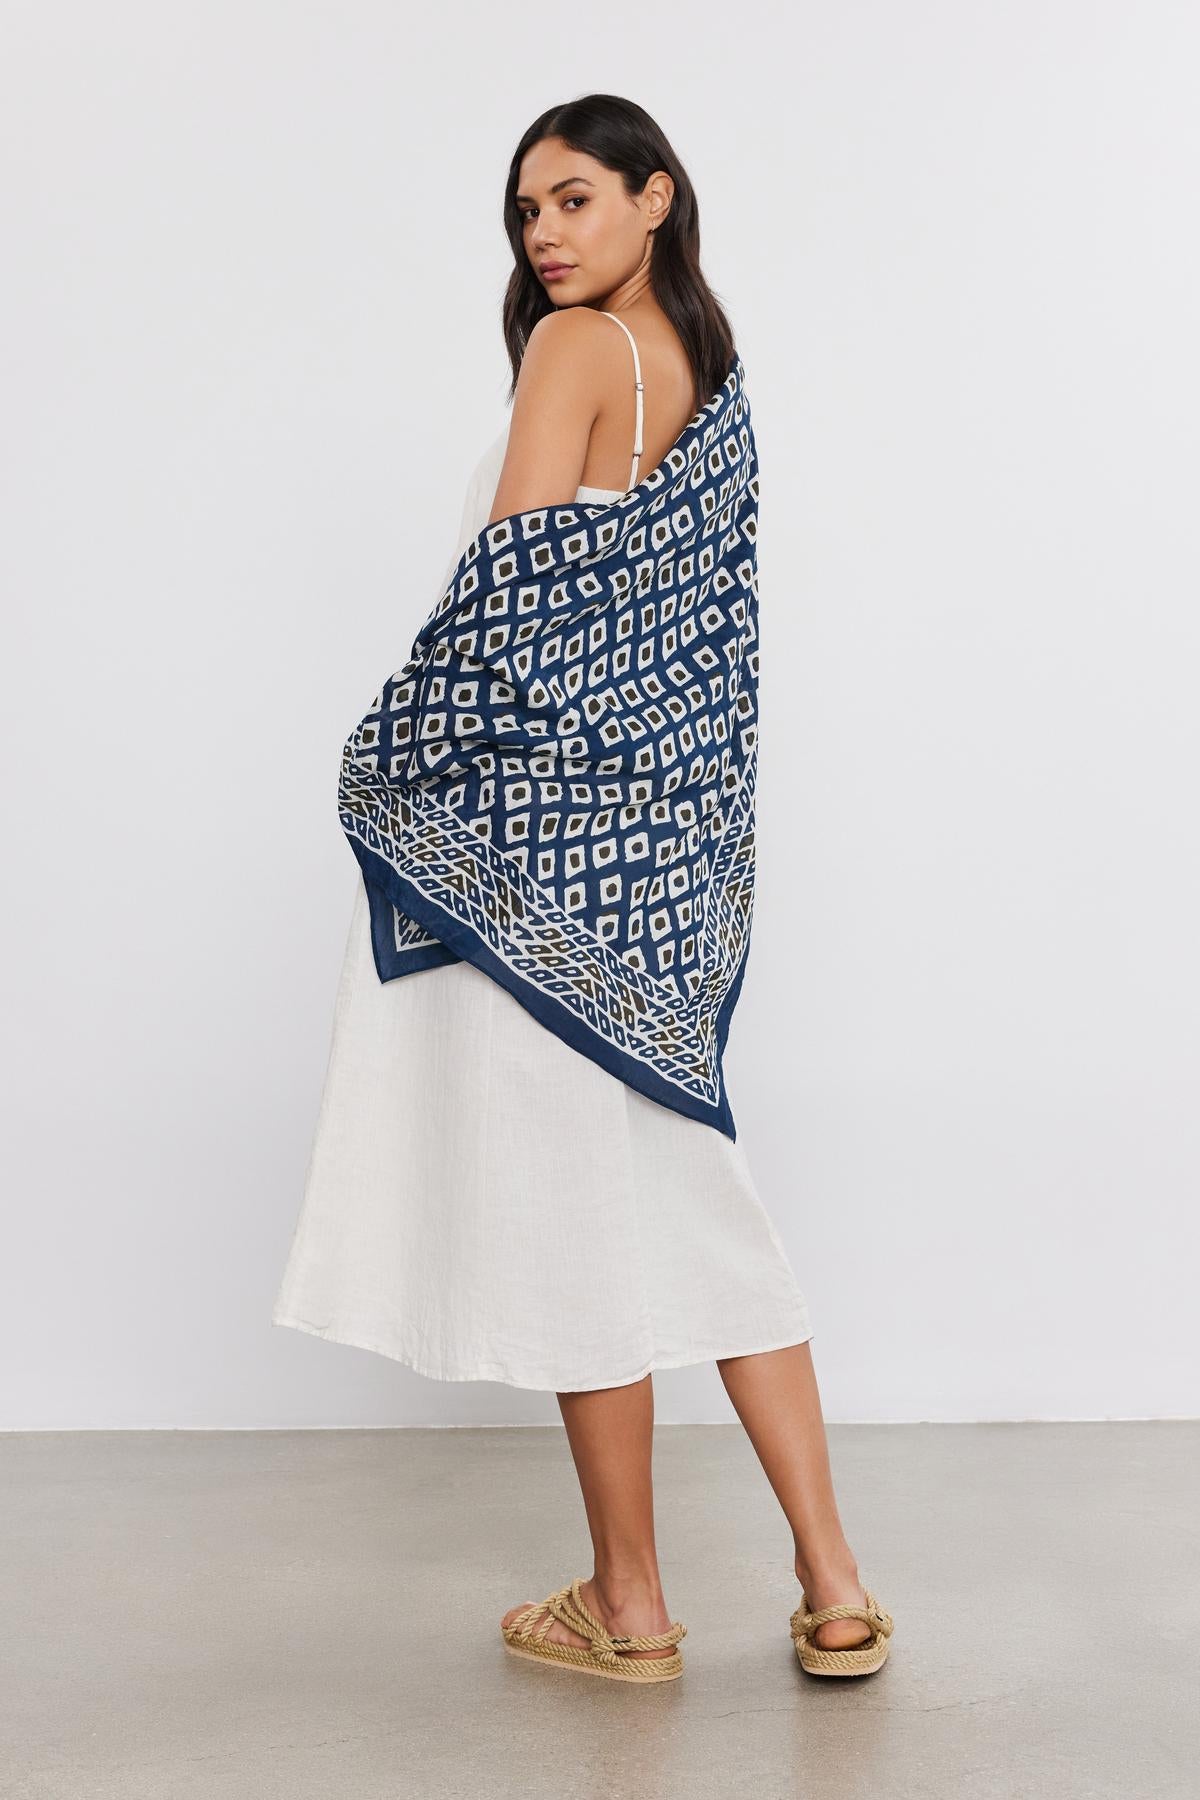 A woman in a white dress and espadrilles, draped in a Velvet by Graham & Spencer SARONG WRAP, stands looking over her shoulder against a plain background.-36752950591681